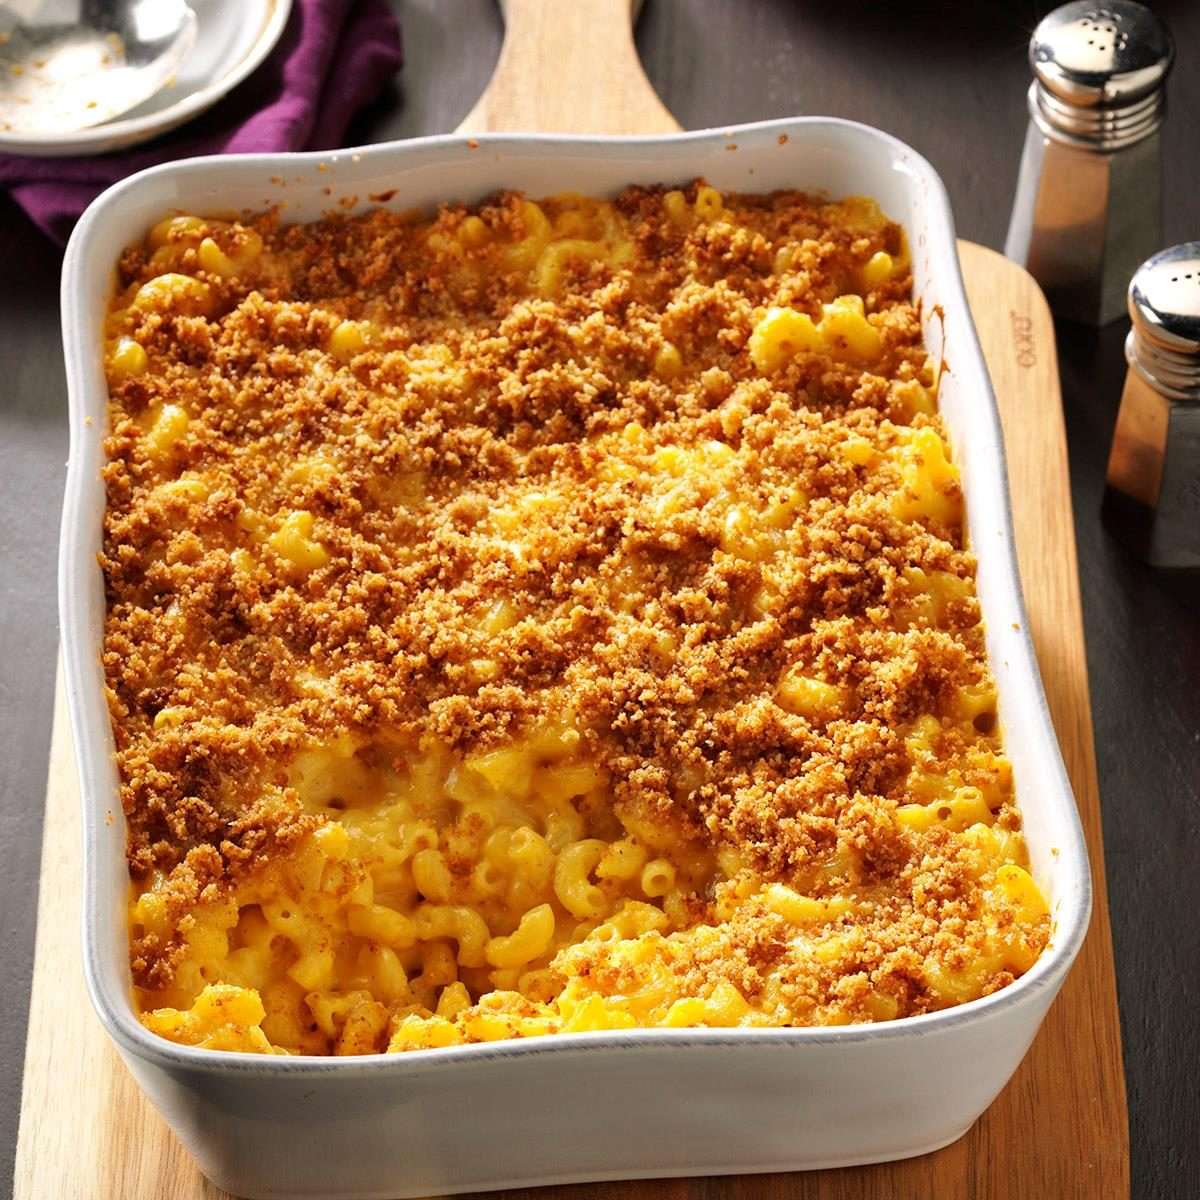 Baked Mac and Cheese Recipe: How to Make It